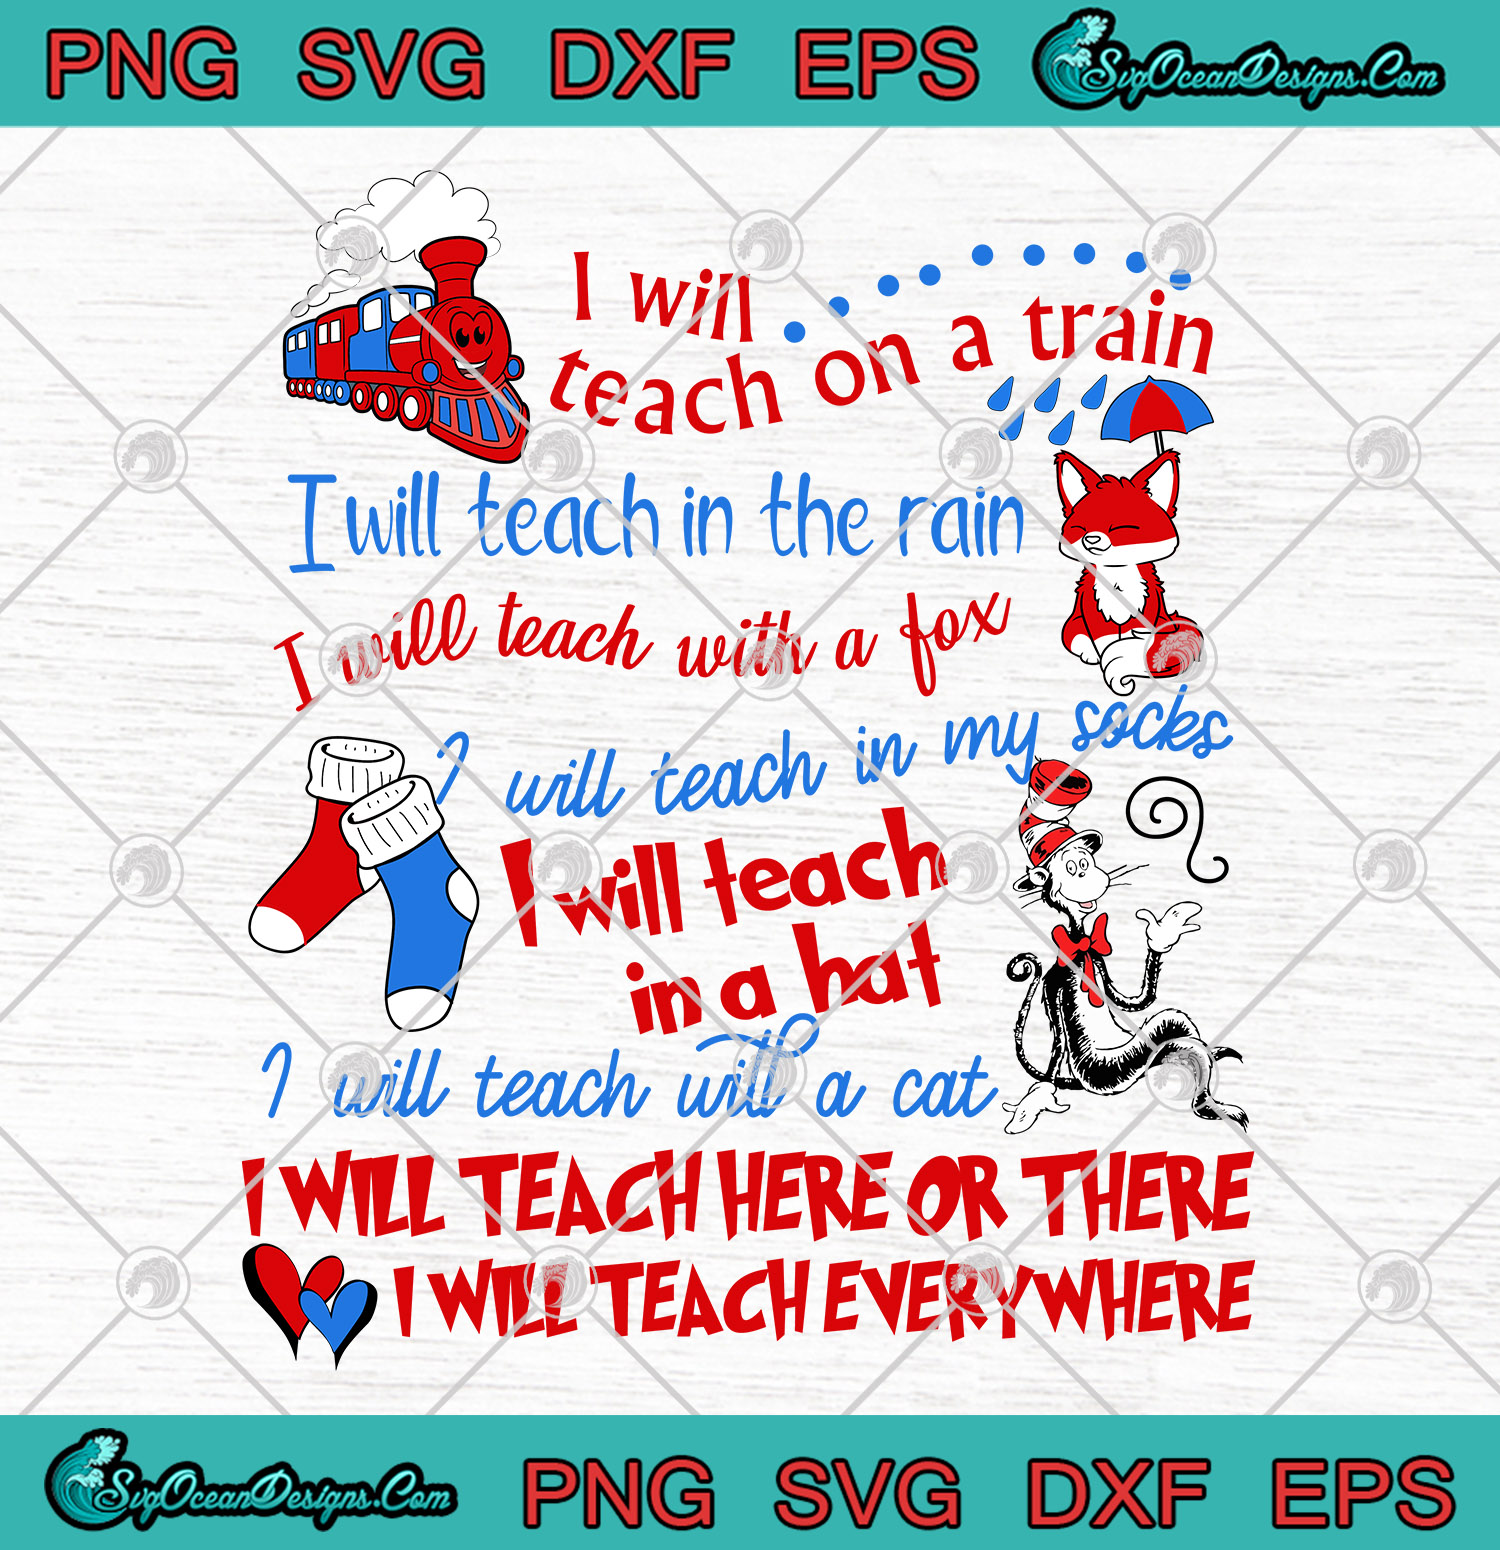 Download One Fish Svg Teacher Of All Things Svg Dr Seuss Png Dr Seuss Svg Two Fish Svg Dr Seuss Bundle Svg Dr Seuss Thing 1 Svg Thing 2 Svg Prints Art